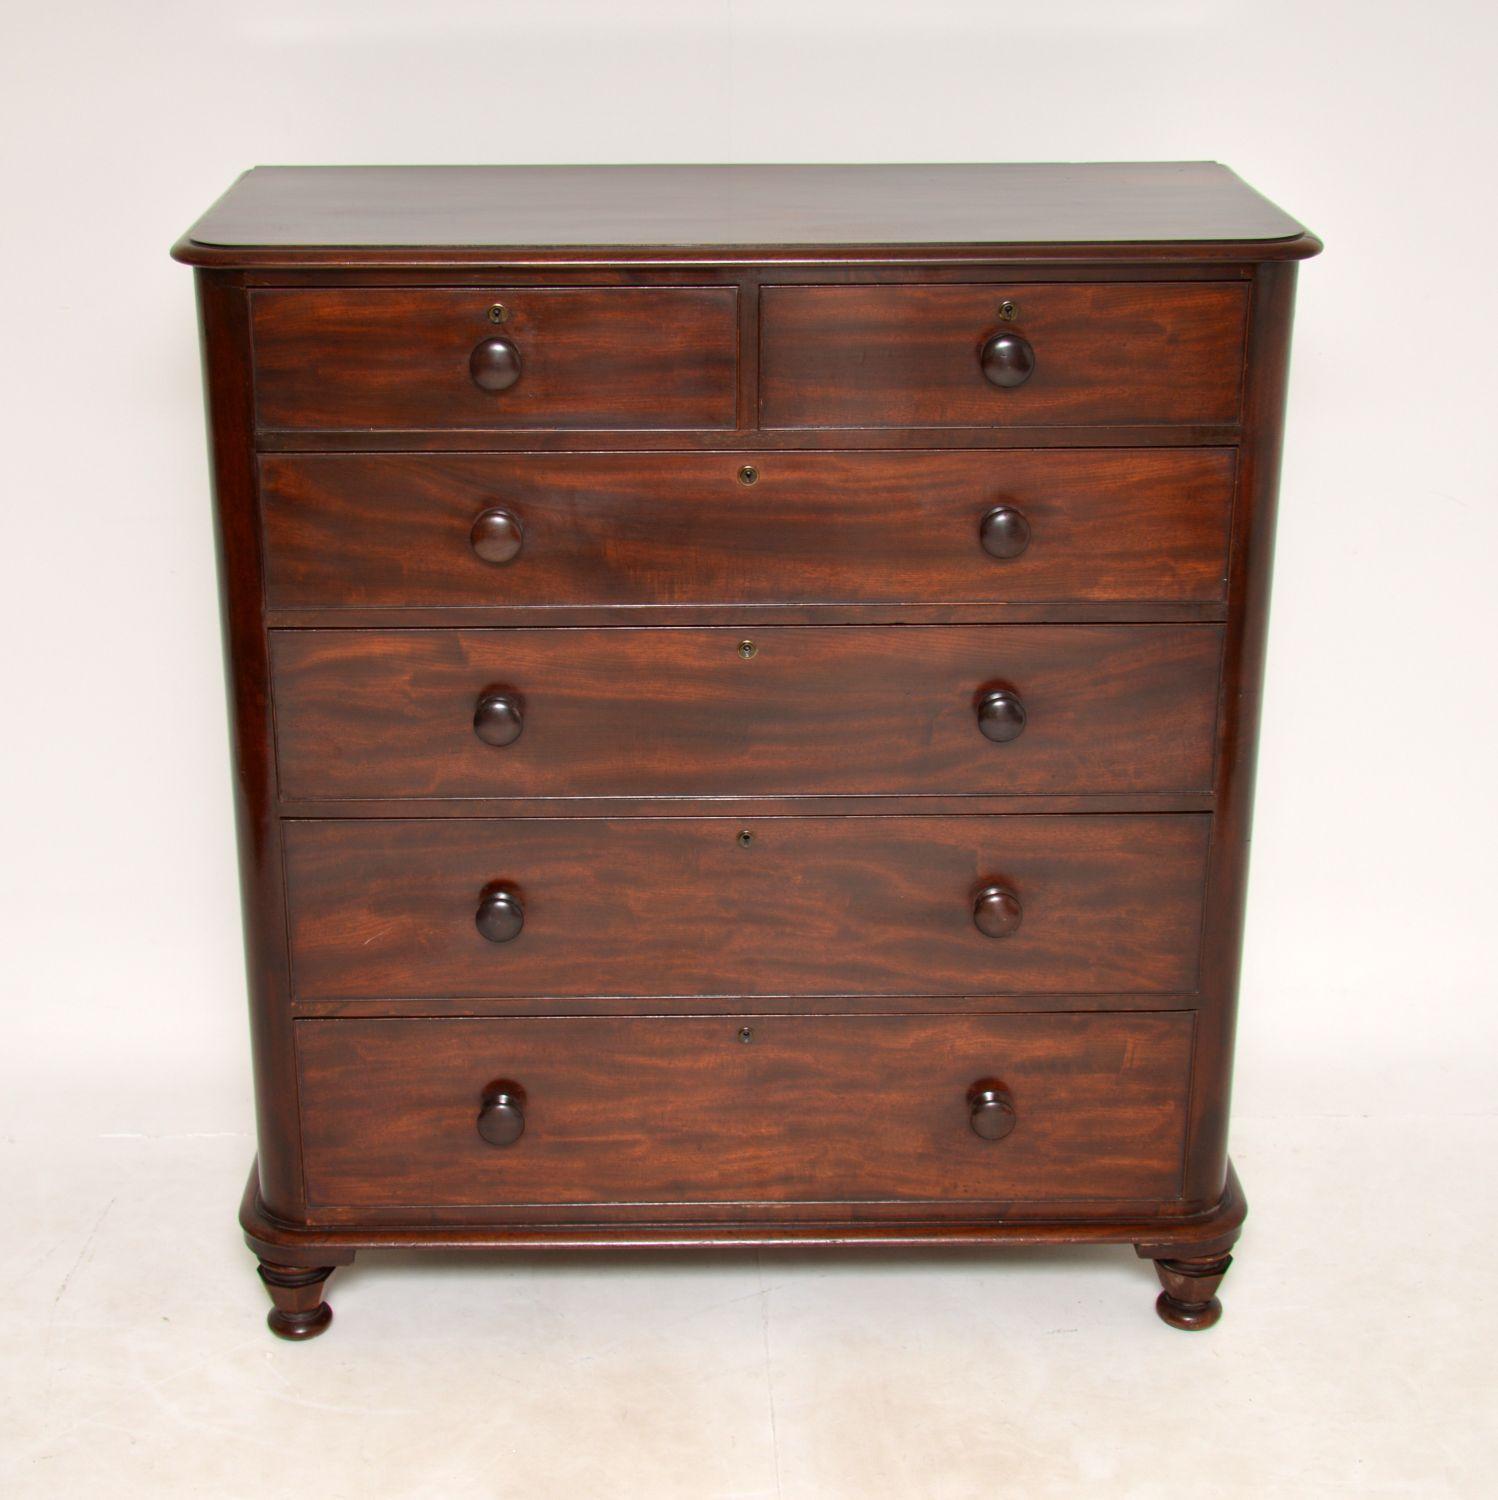 A large and top quality William IV period chest of drawers in solid wood, made in England & dating from around the 1830-1840’s period.
The quality is outstanding, this is extremely well made and contains lots of storage space. The wood has a